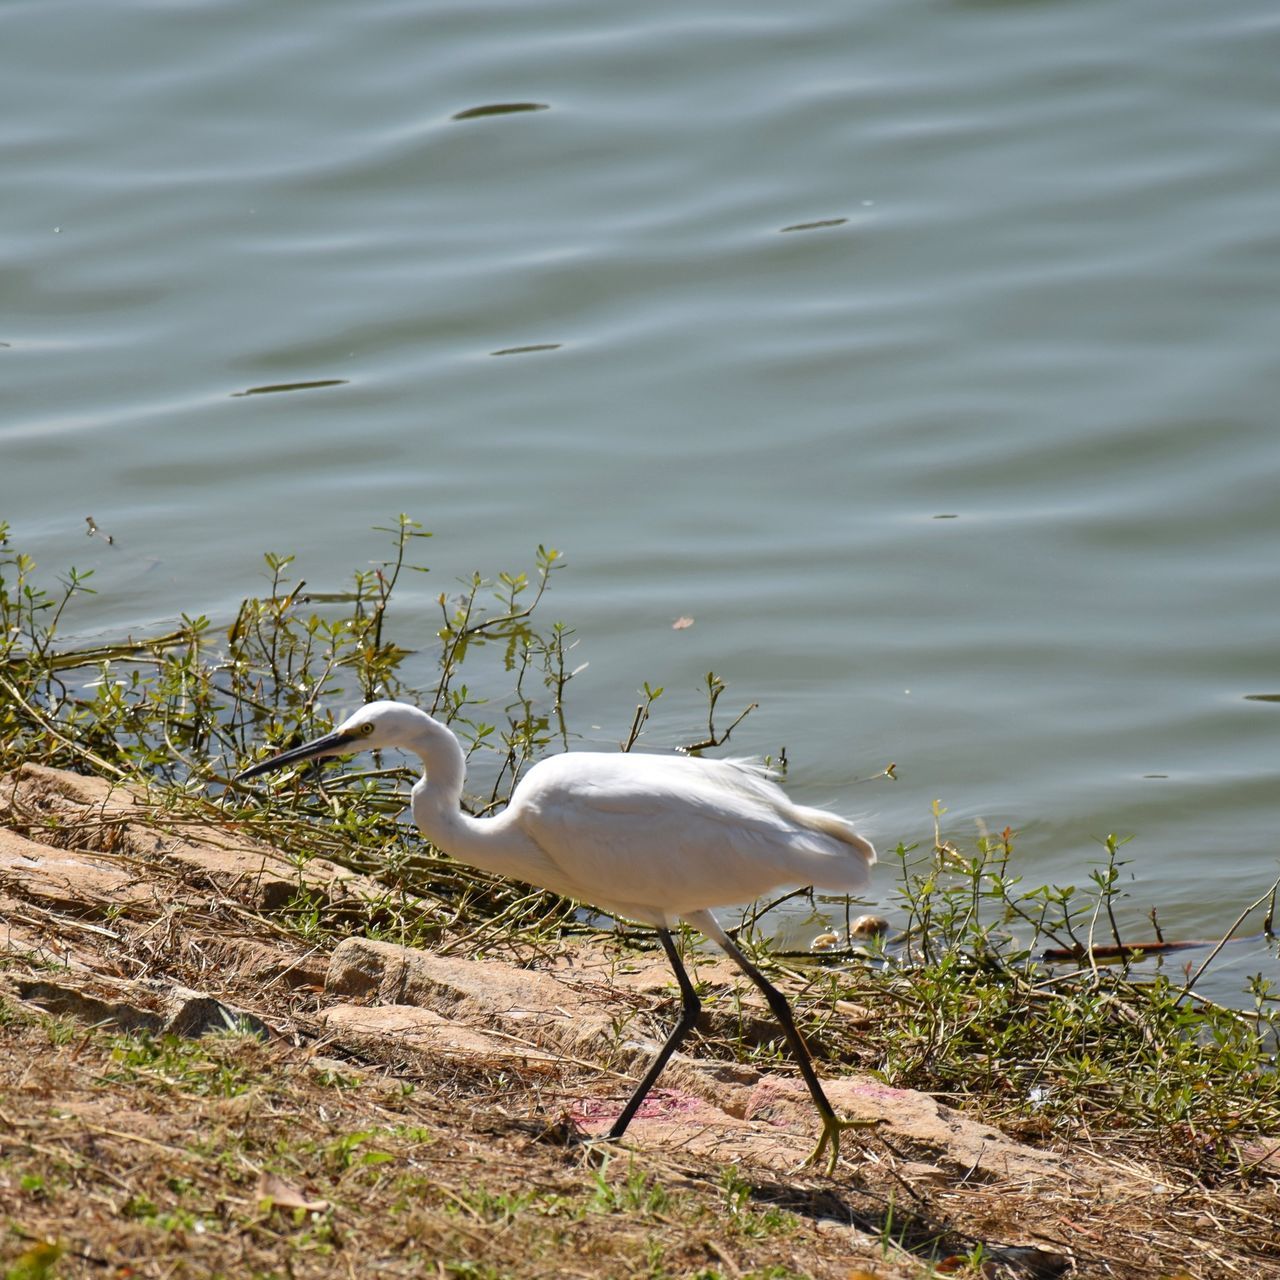 bird, animal themes, animals in the wild, animal wildlife, one animal, water, no people, lake, nature, outdoors, day